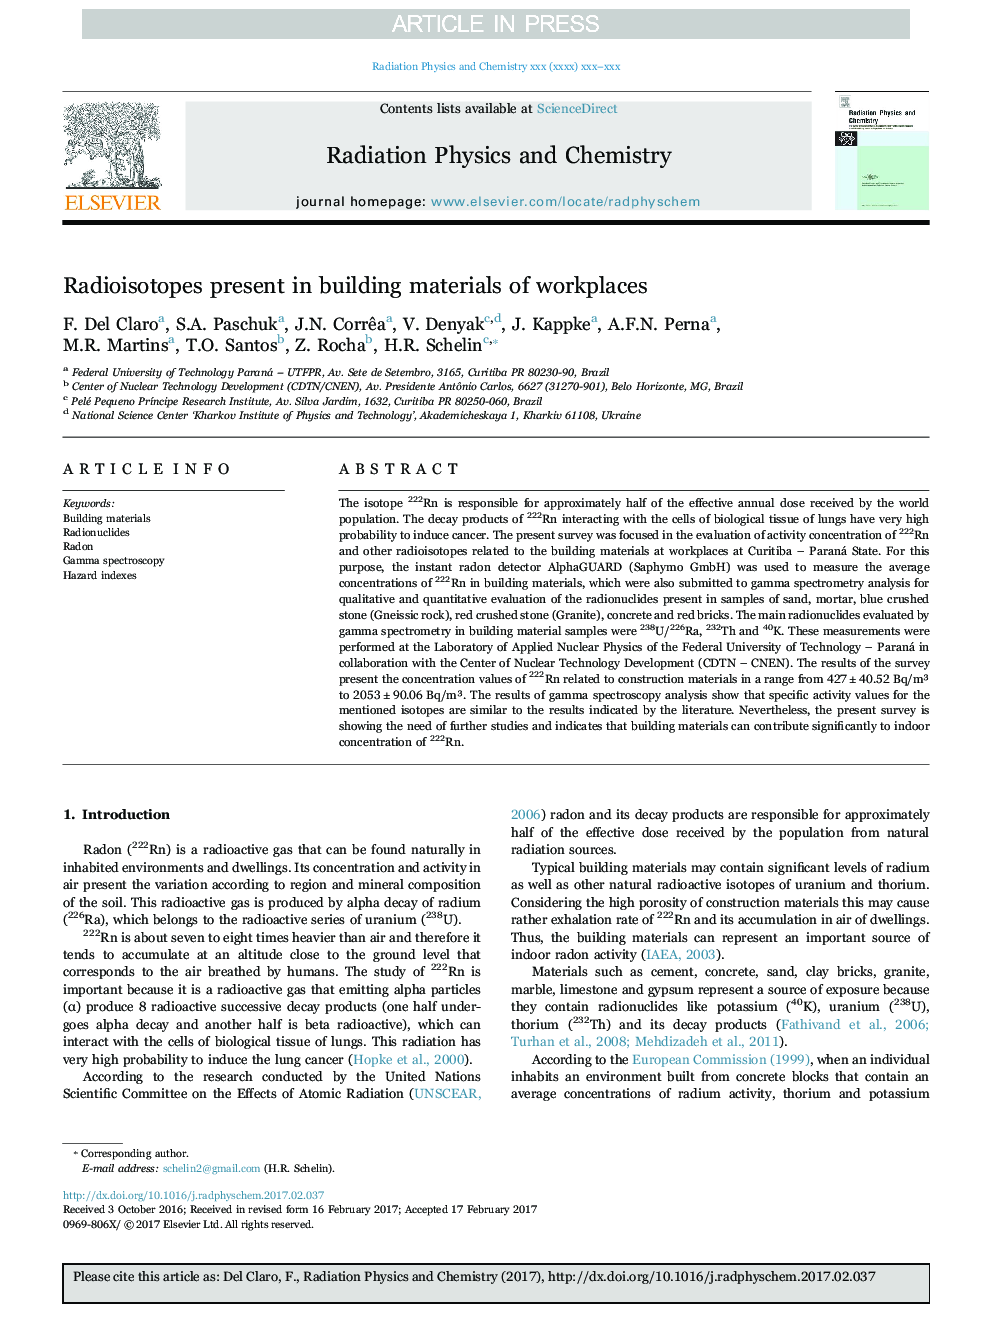 Radioisotopes present in building materials of workplaces